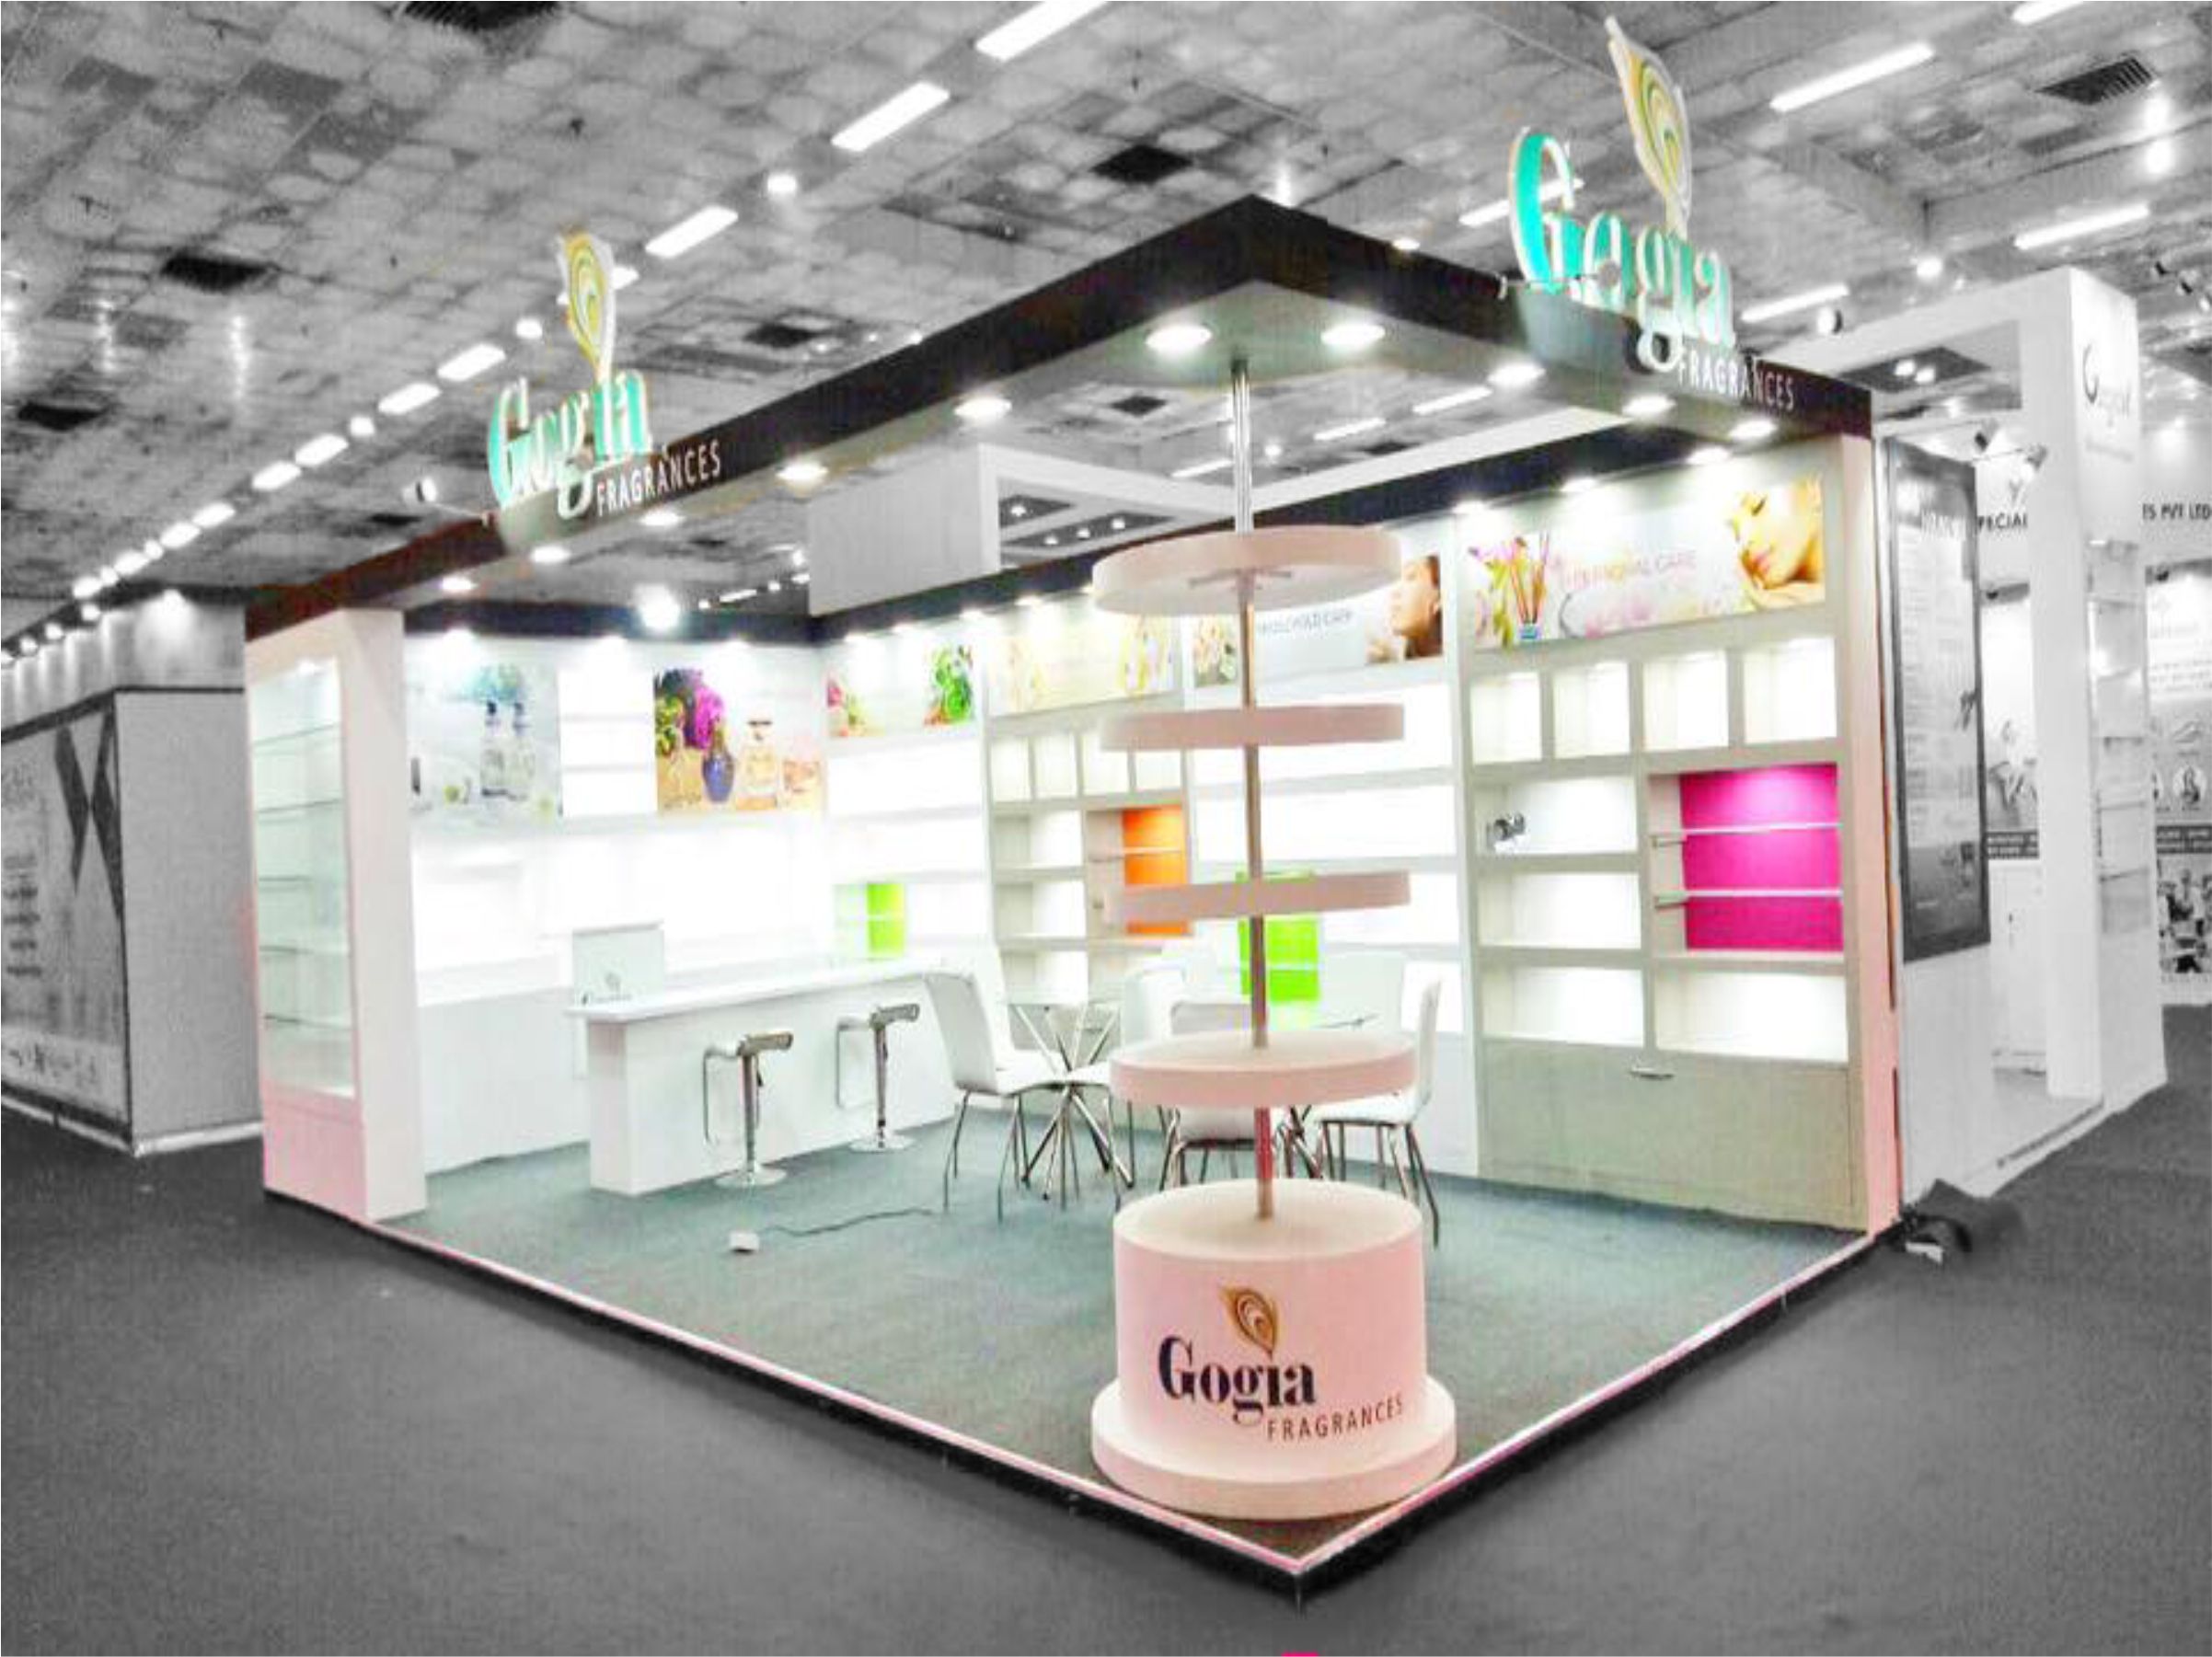 Booth Designer and fabricator of Gogia Fragrance